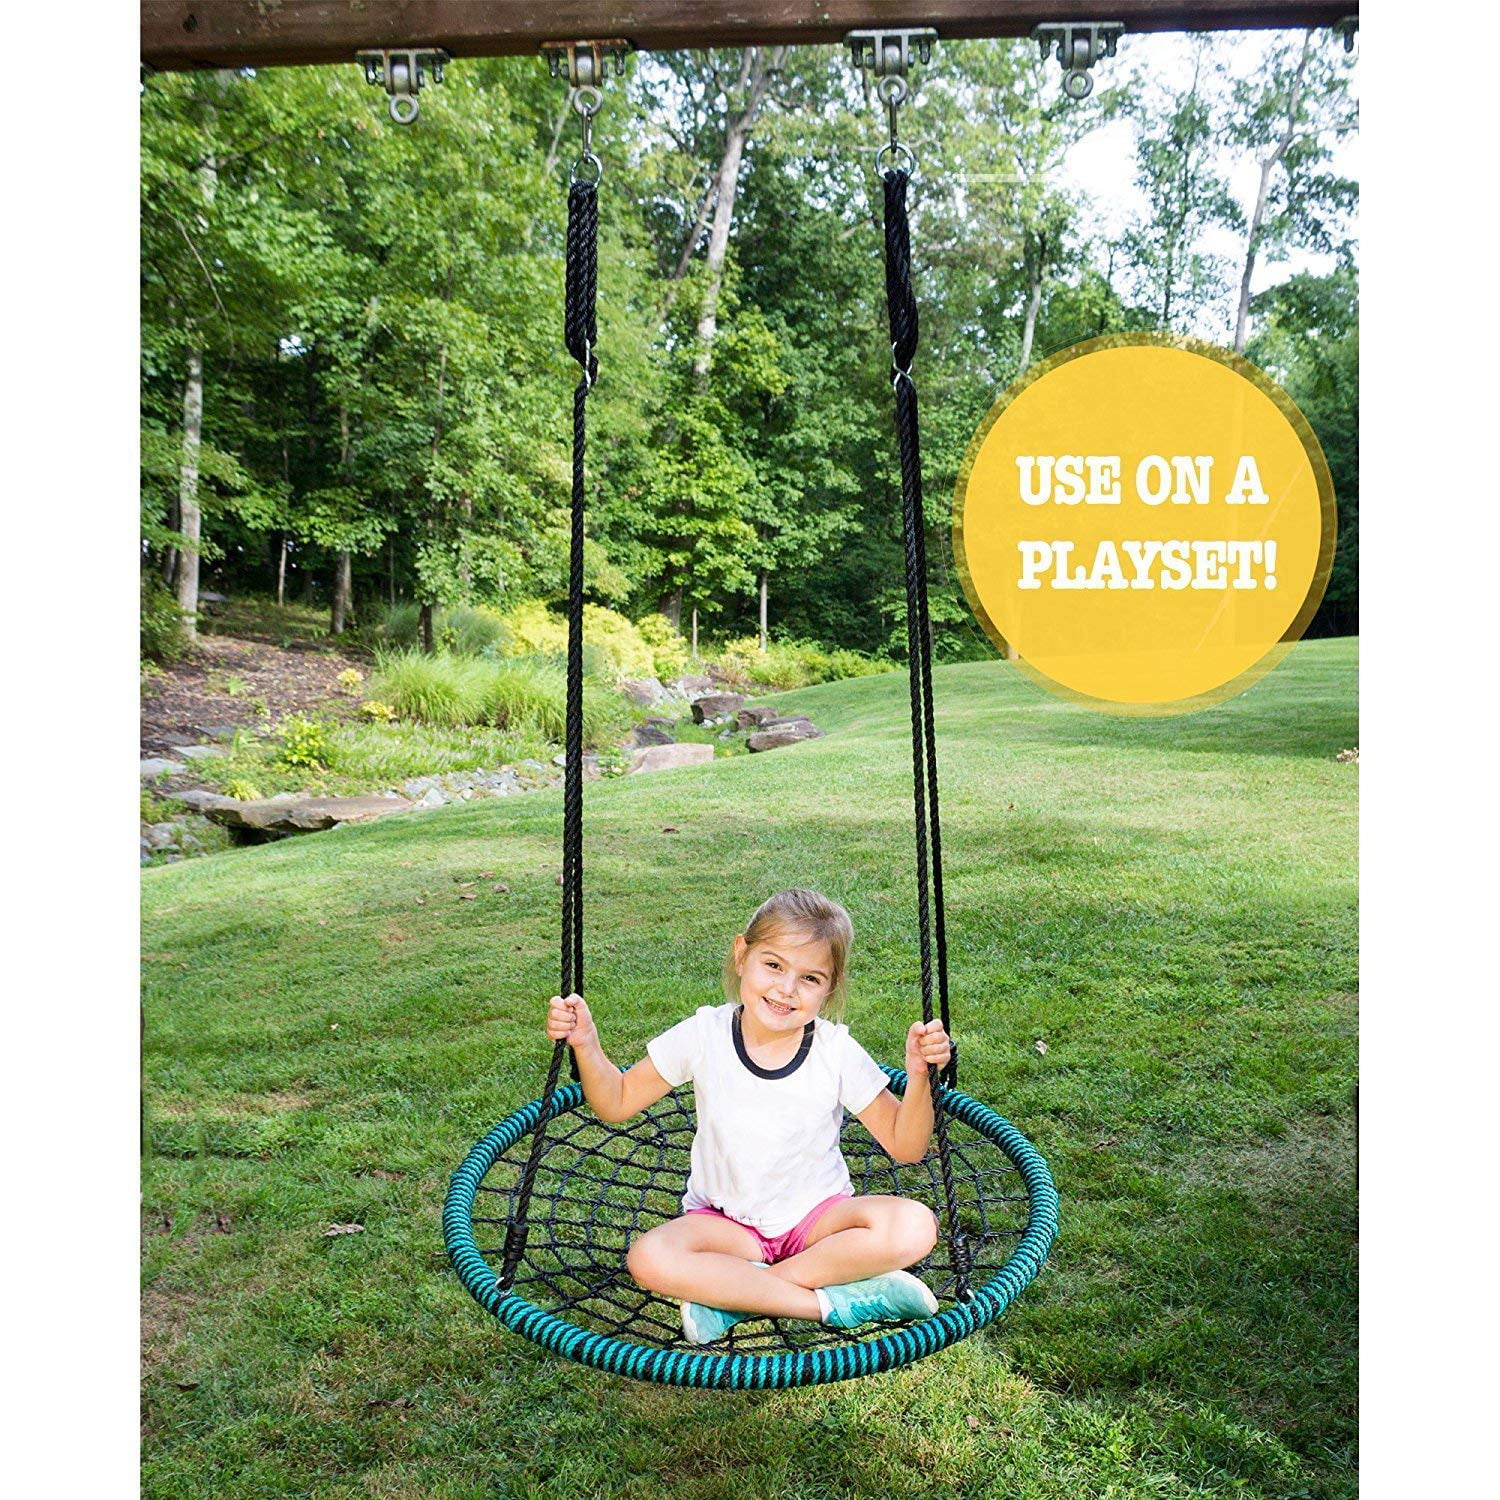 Easy to Install 600 lb Weight Capacity Cool Multi Color Play Platoon Spider Web Tree Swing Fully Assembled 40 Inch Diameter 